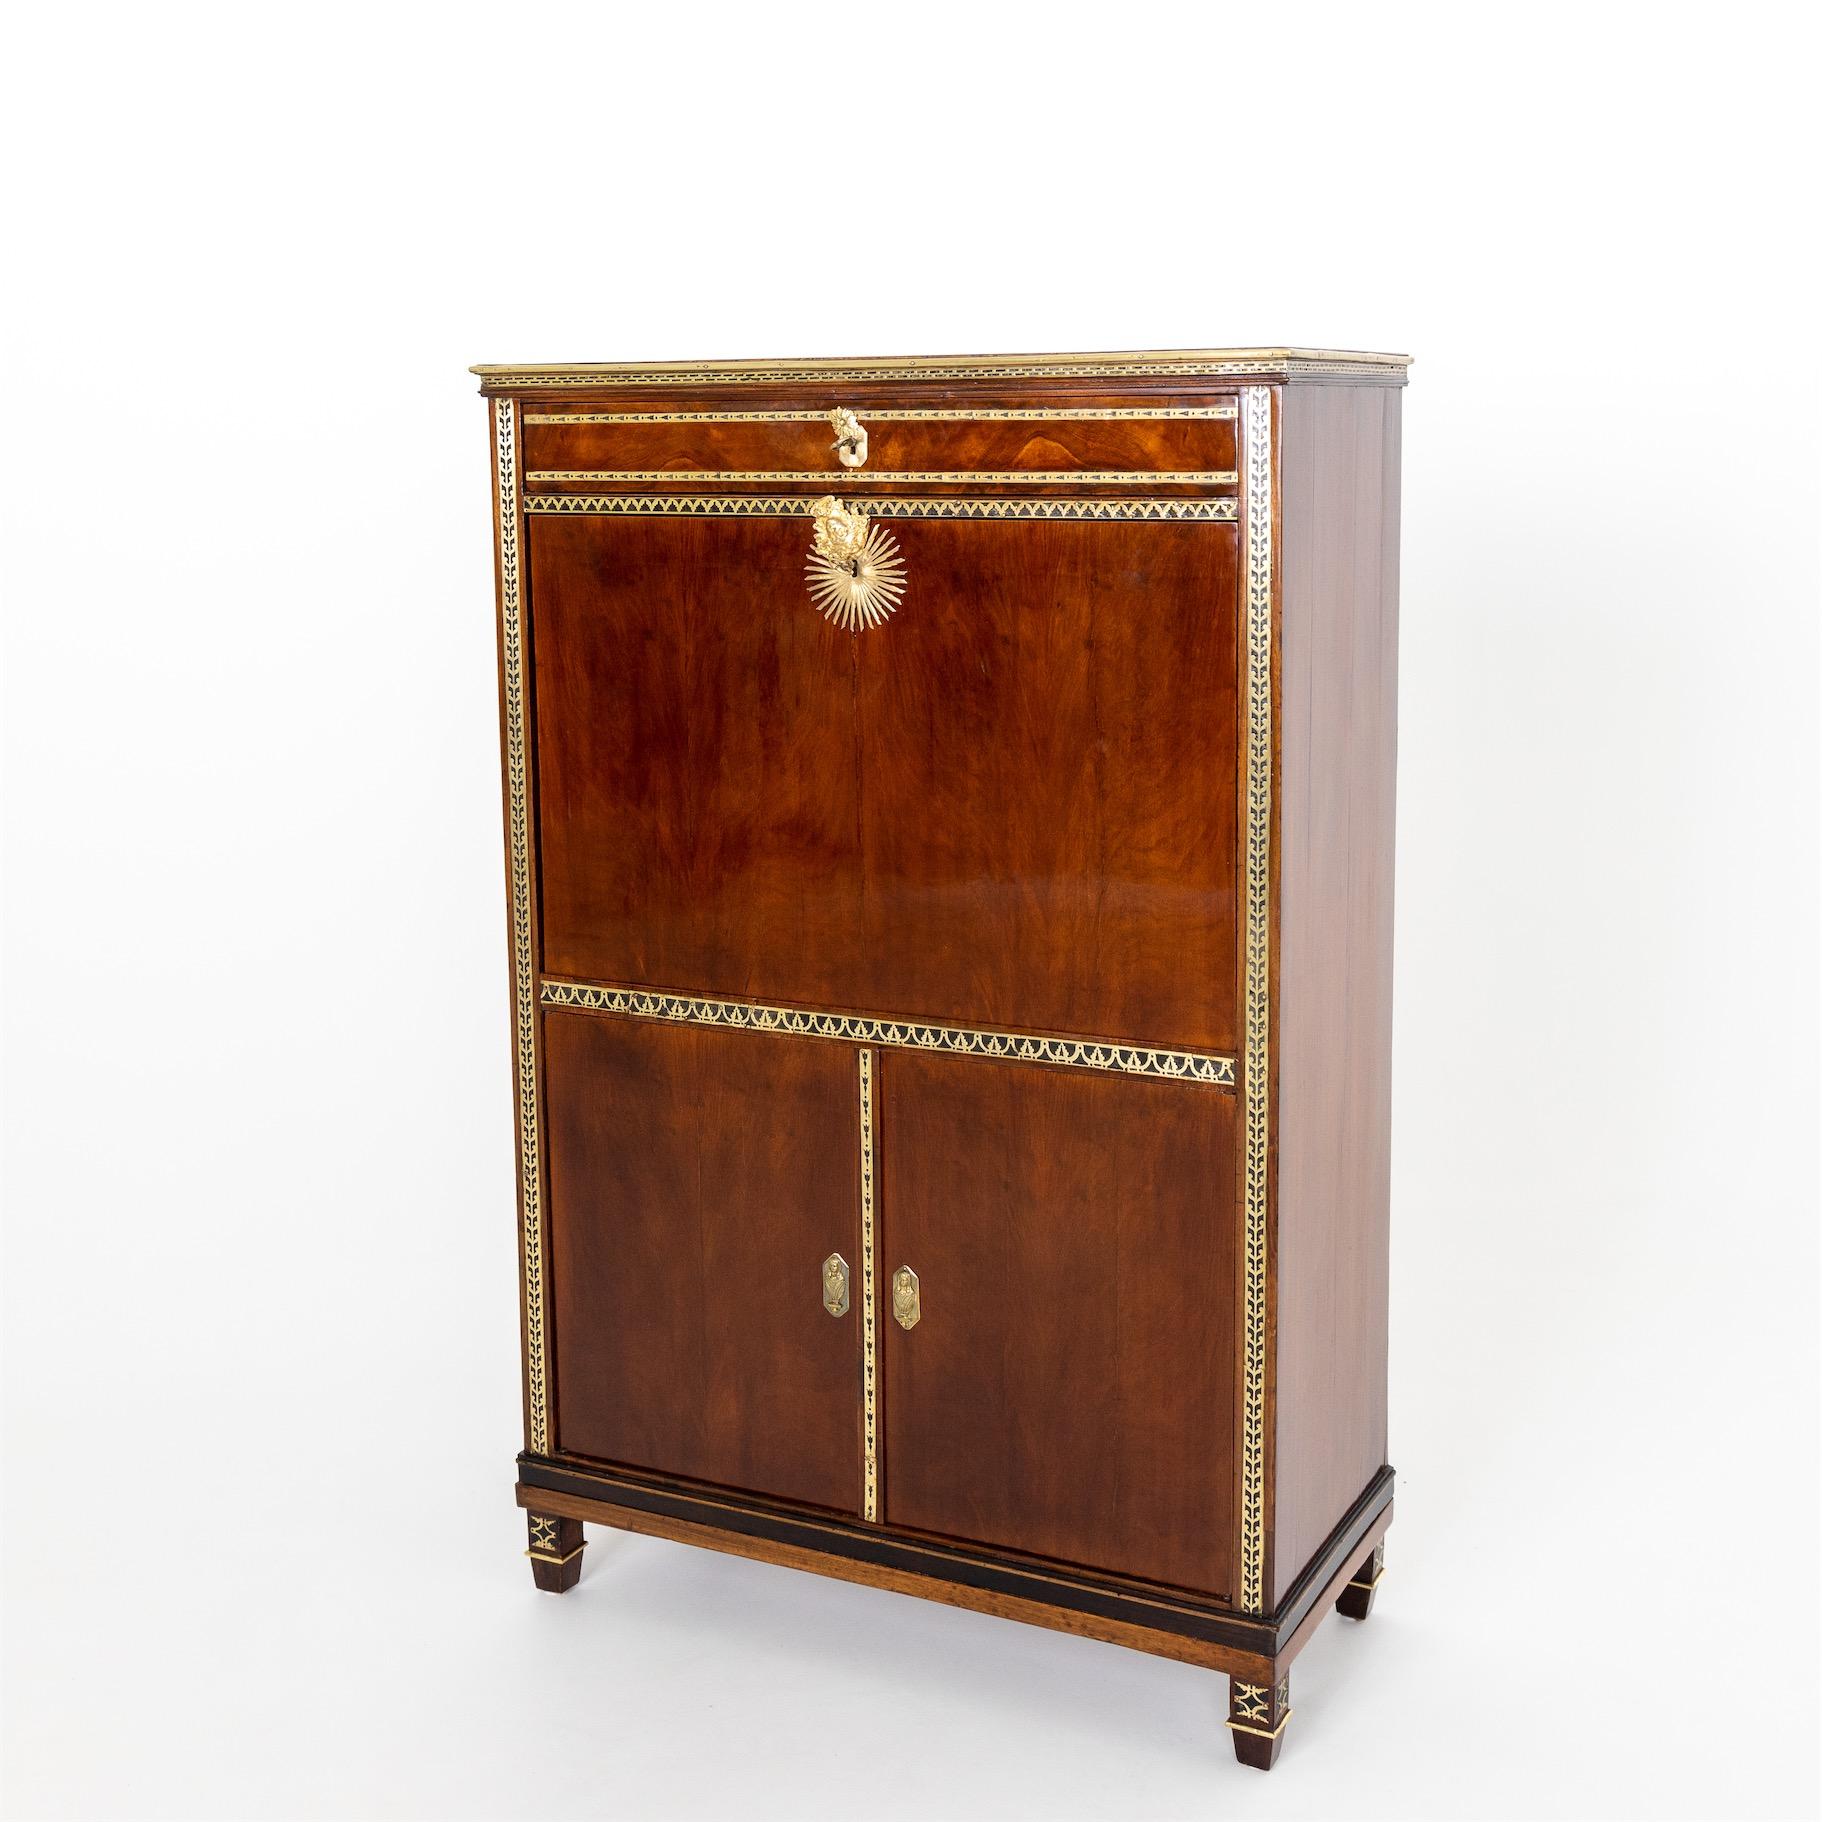 Secretaire, veneered in mahogany and decorated with pierced brass bands along the pilasters and traverses. The two-door base cabinet is also decorated with brass banding along the centre stile and features brass hardware as keyhole covers in the